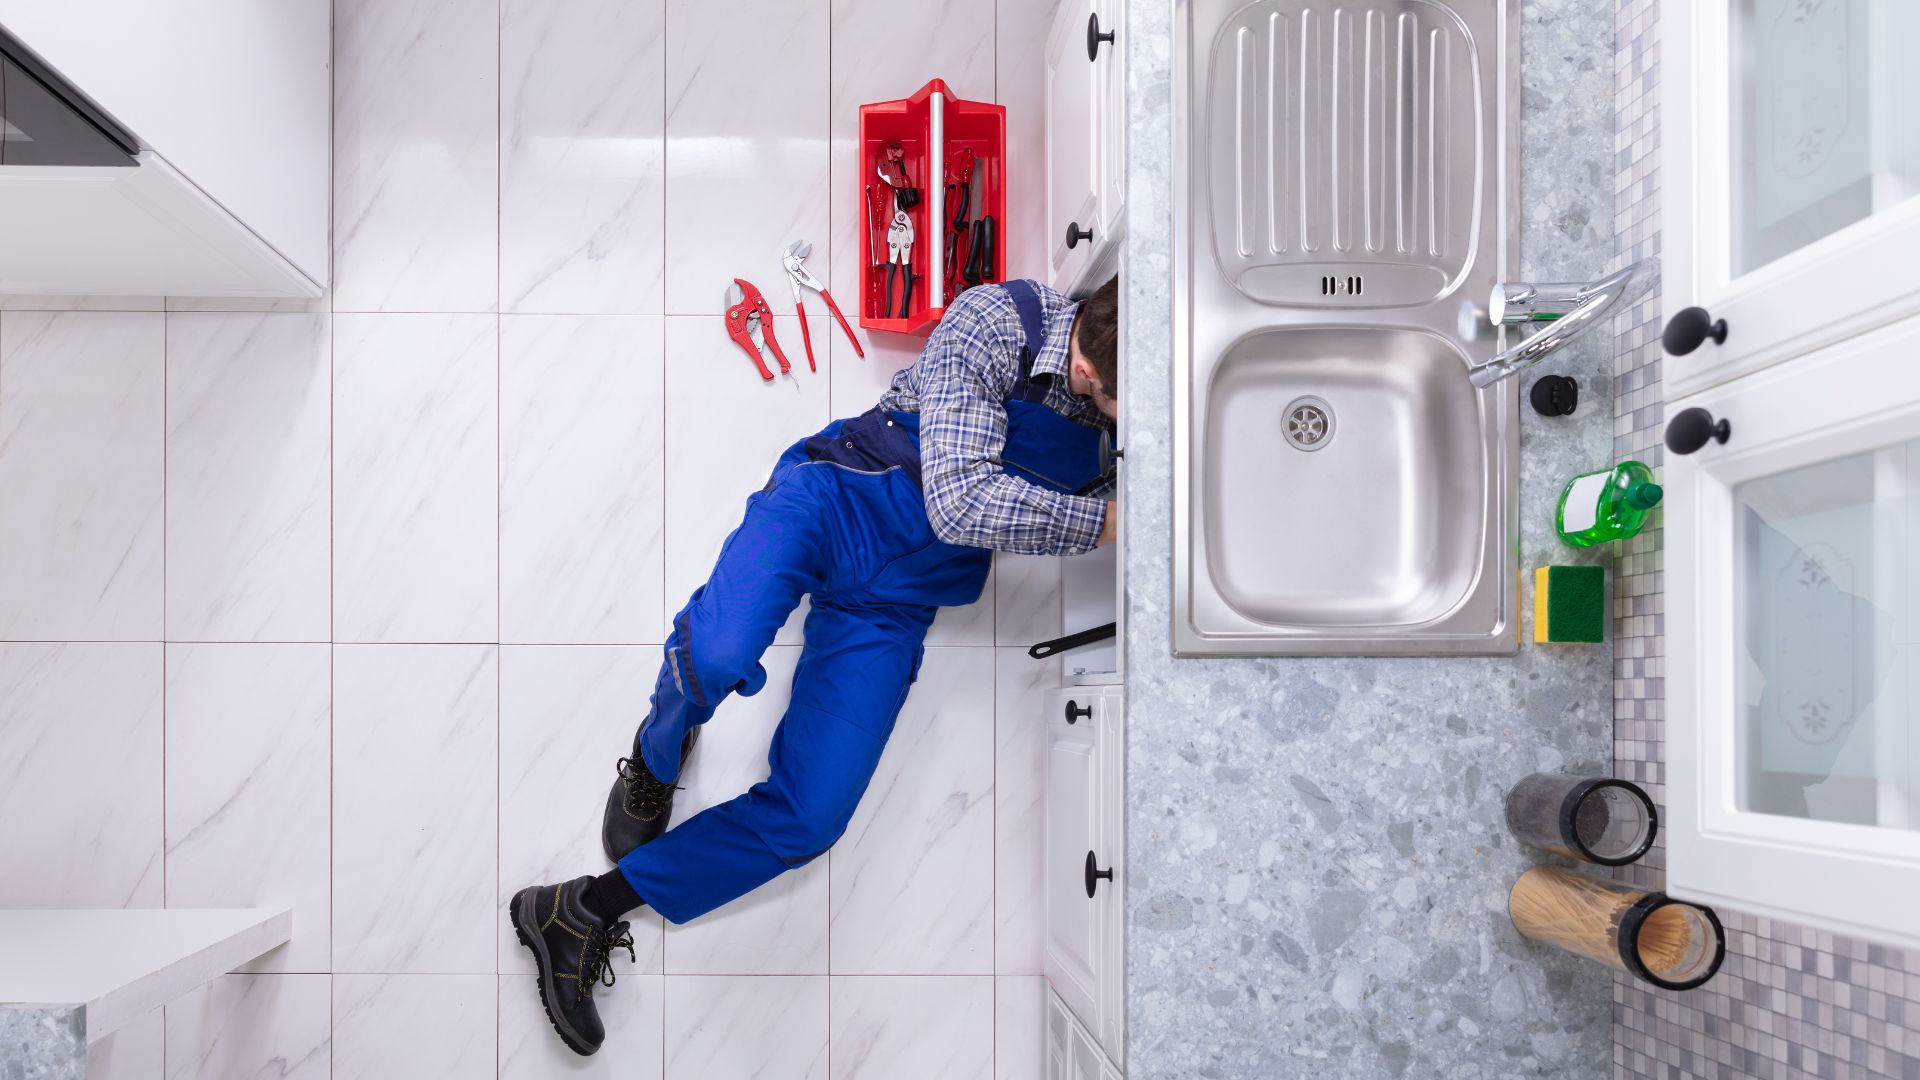 Contact CAN Plumbing and Drainage for comprehensive assistance with all your drain requirements, provided by expert plumbers.